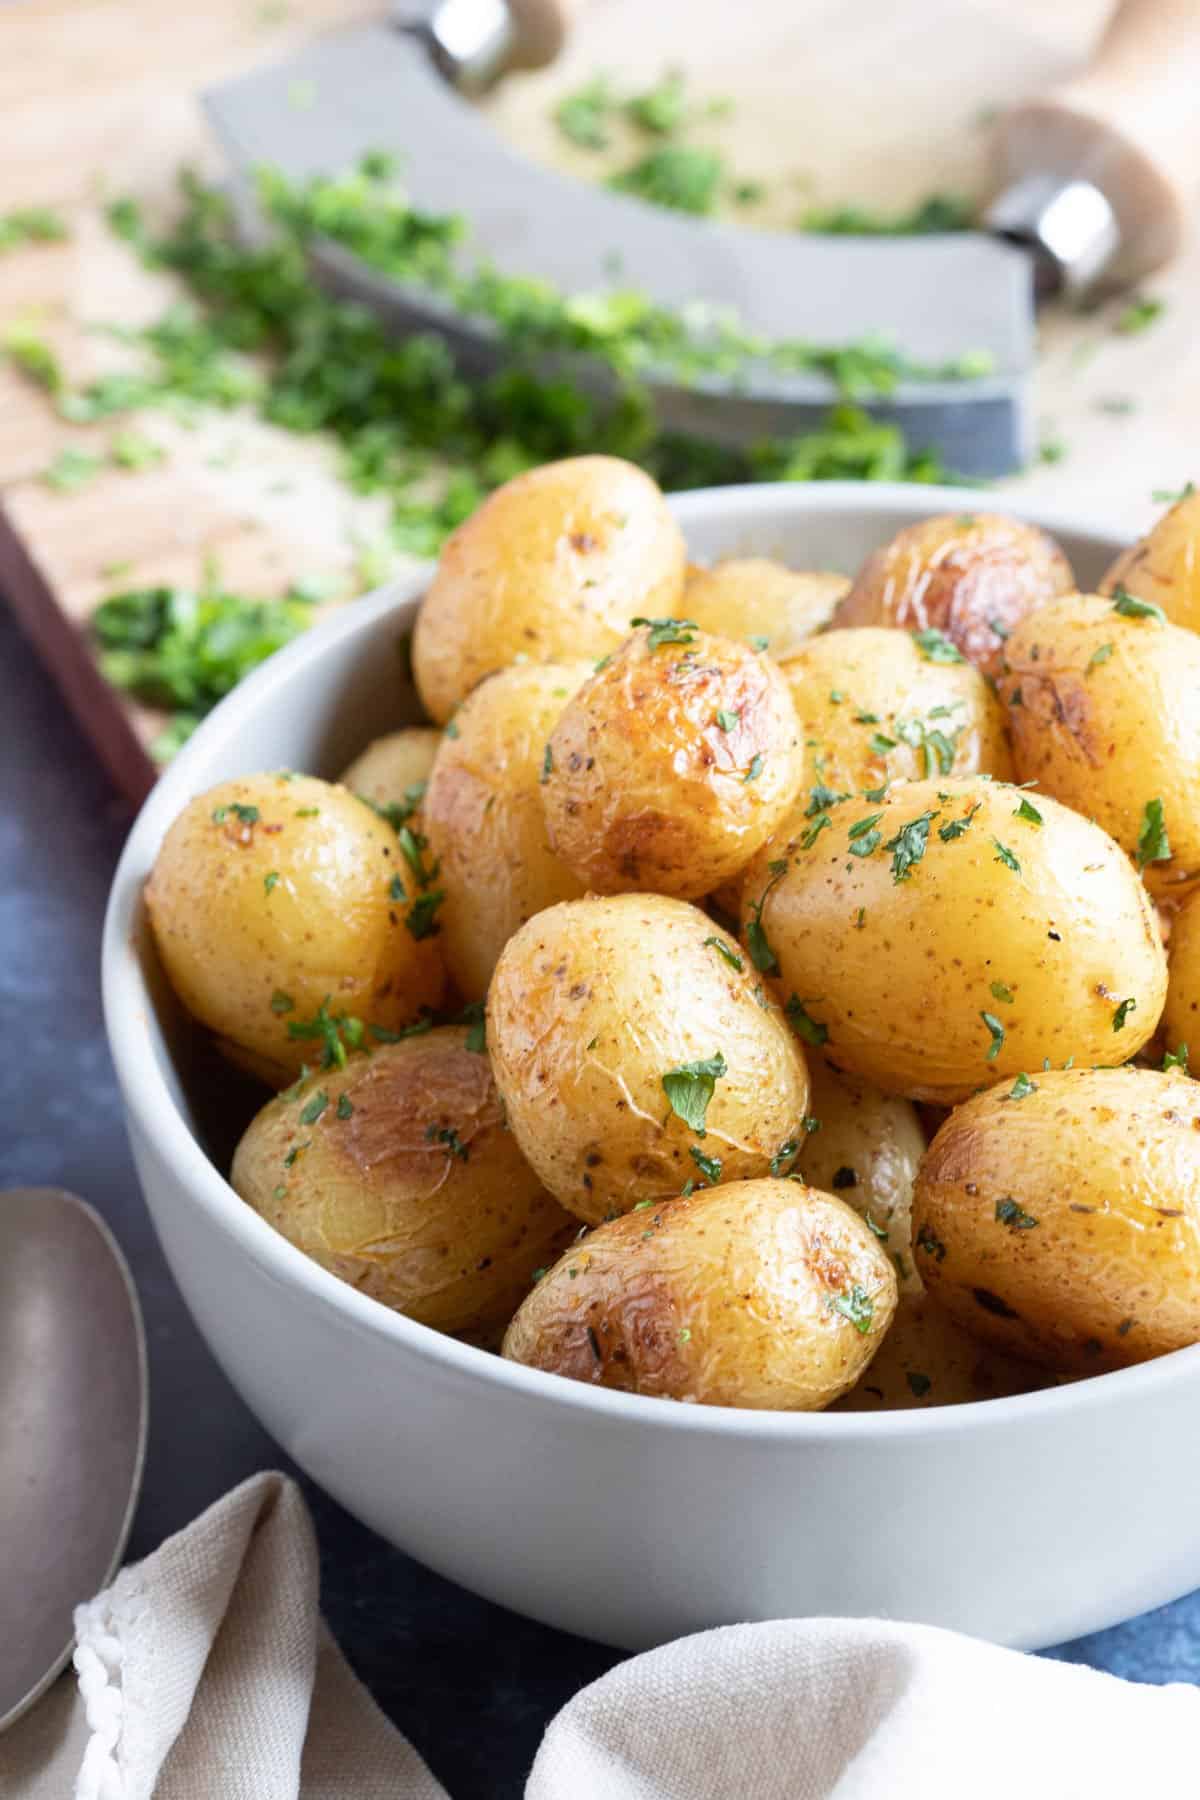 Oven roasted baby potatoes with herbs.